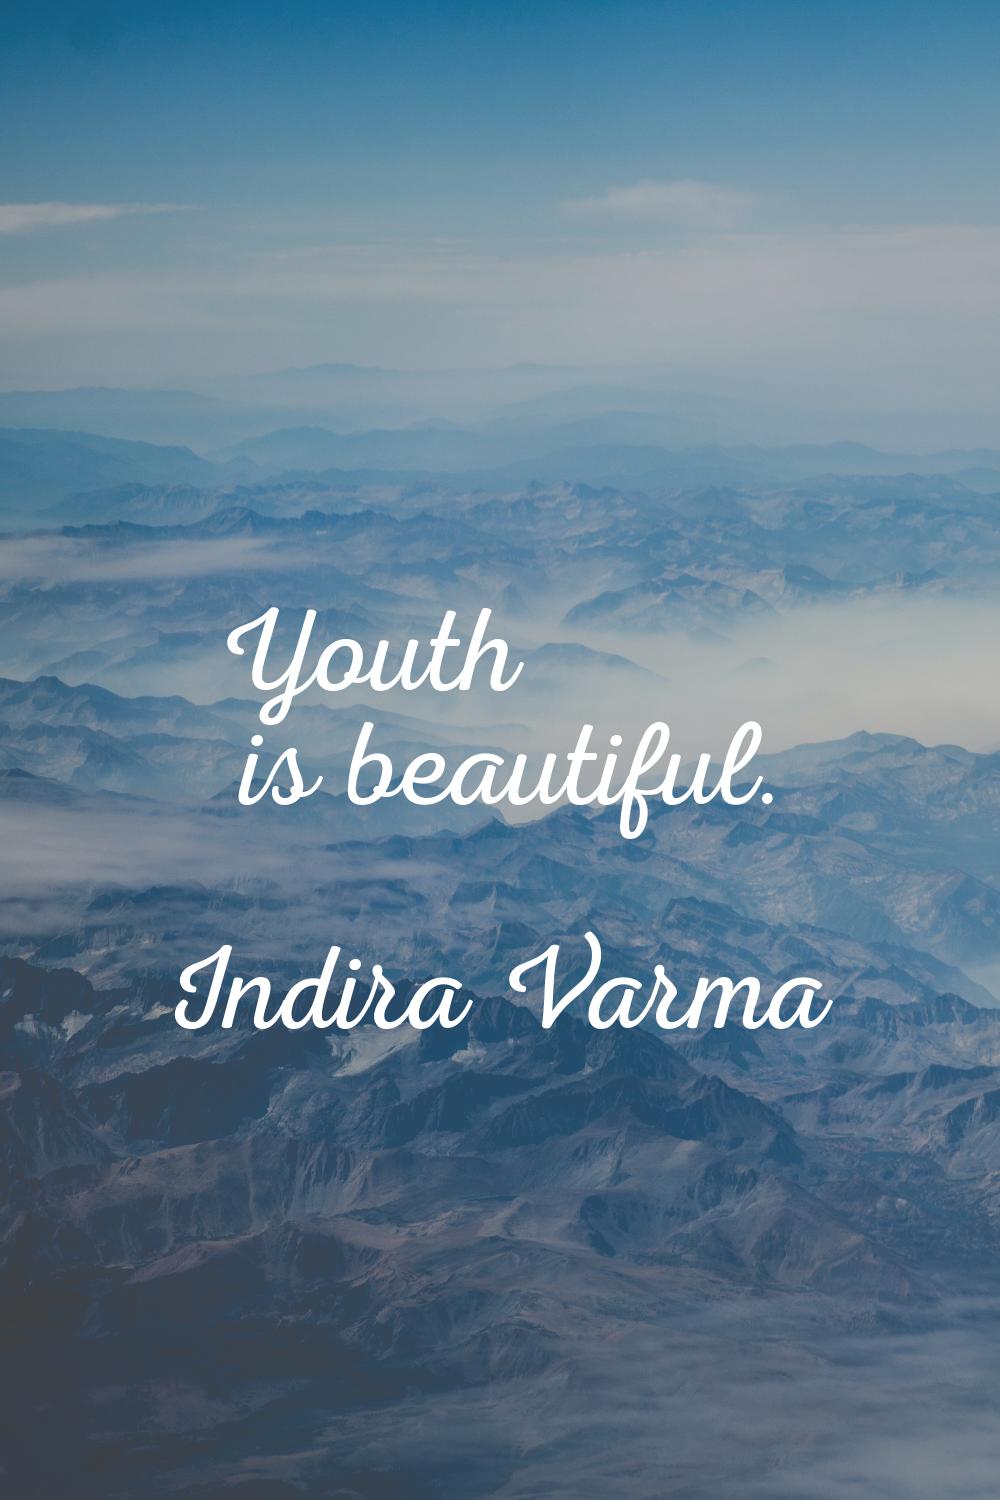 Youth is beautiful.